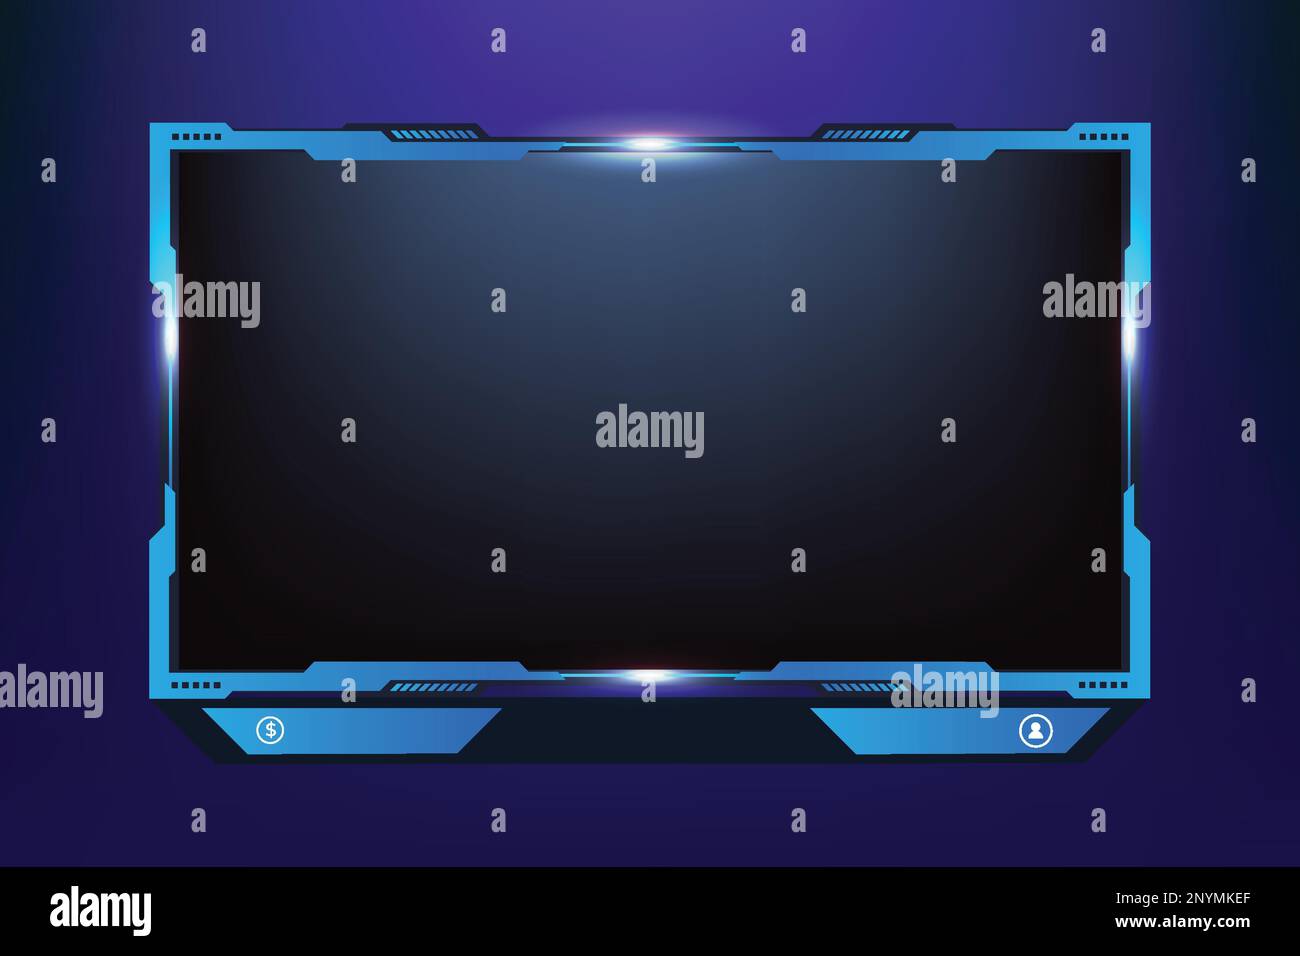 Live gaming overlay panel and border design vector. Modern